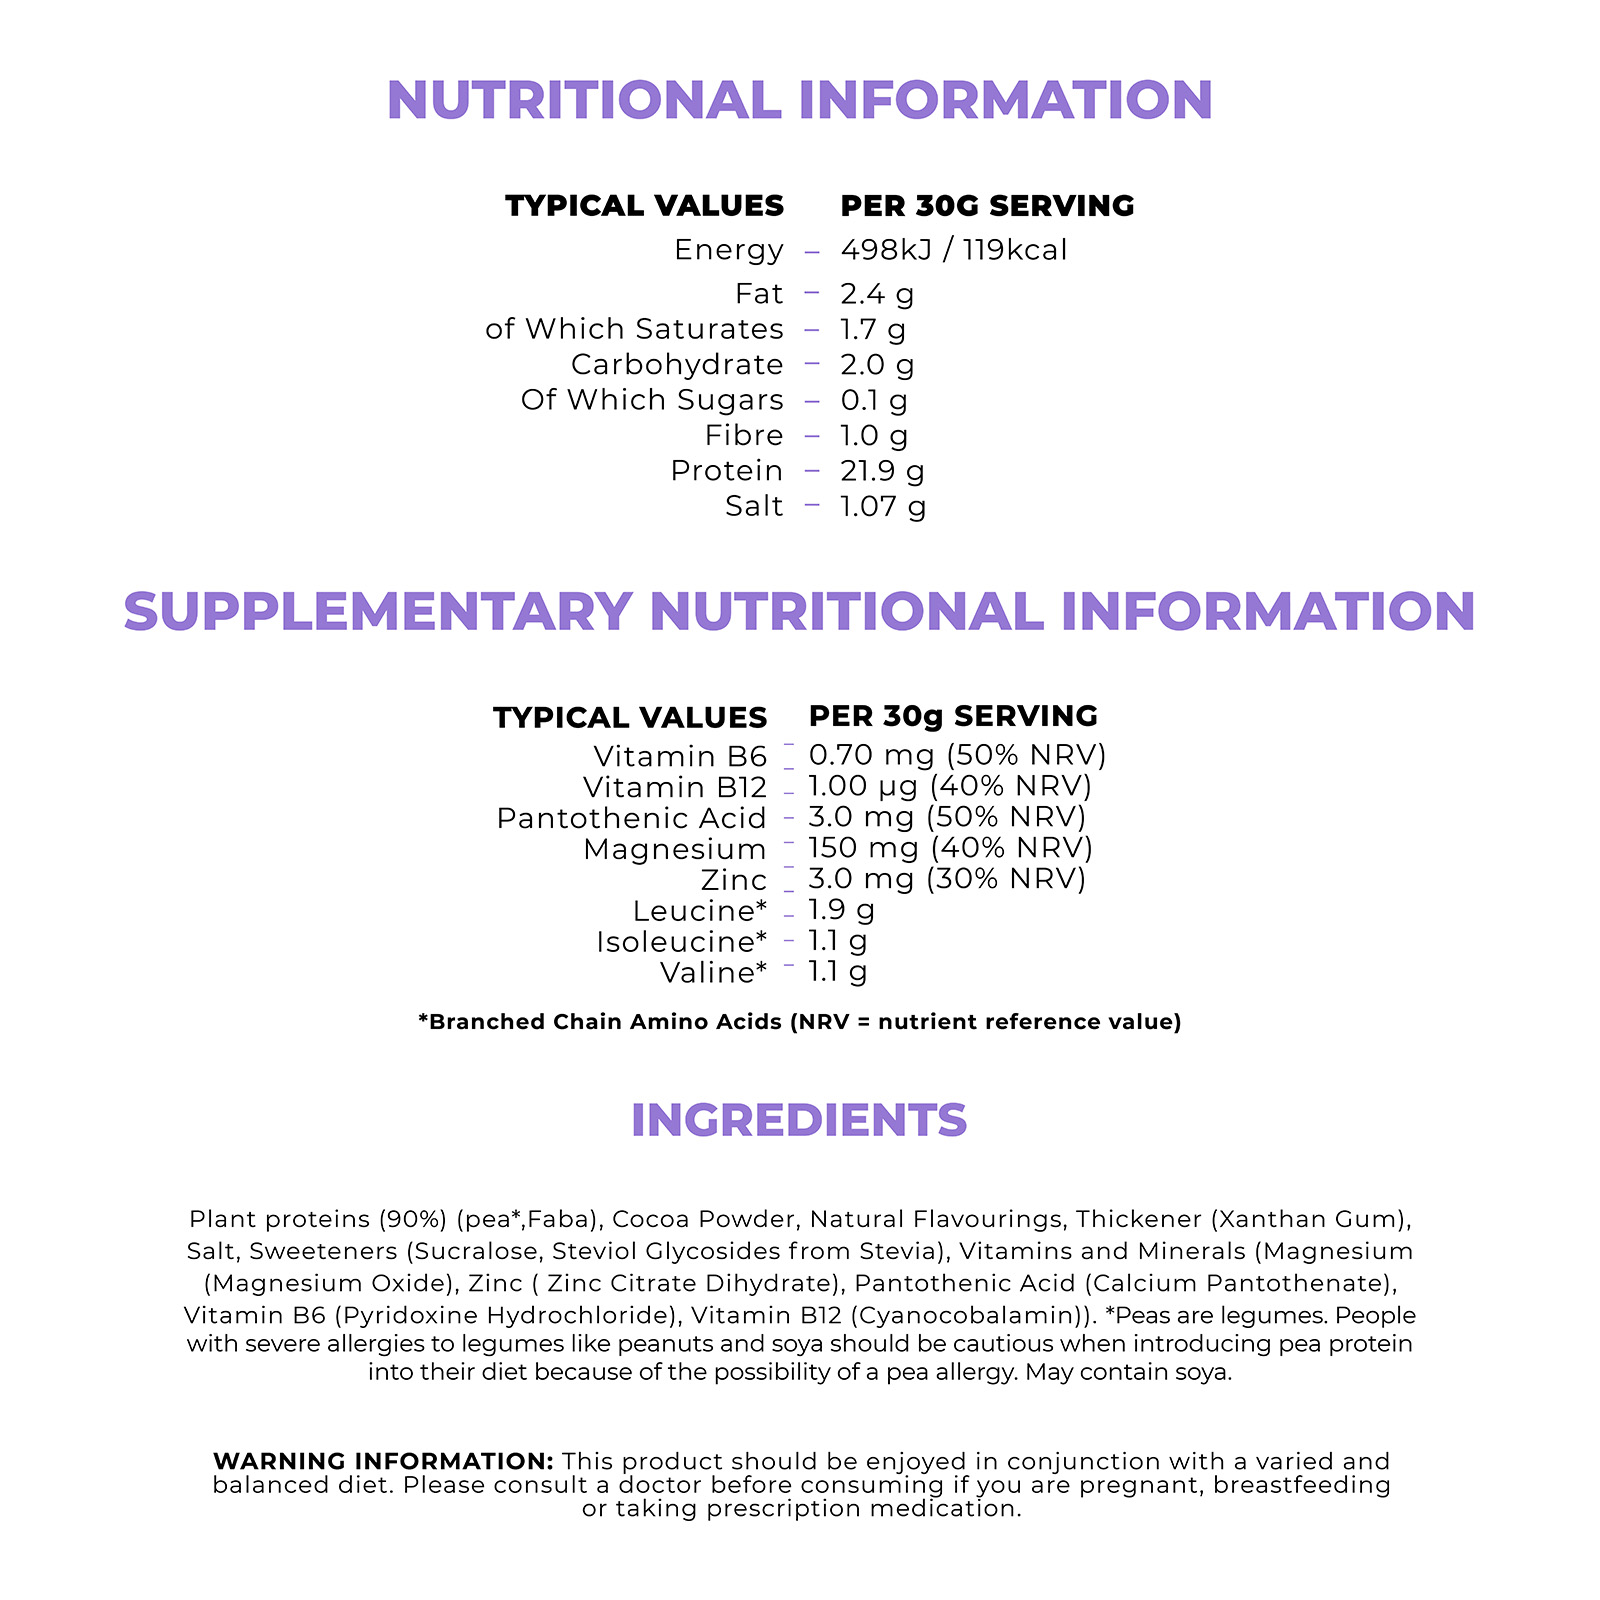 NUTRITIONAL INFORMATION TYPICAL VALUES PER 30G SERVING Energy 498kJ / 119kcal Fat 2.49 Of Which Sugars - 0.1 g Fibre - 1.0 g of Which Saturates Carbohydrate Protein Salt SUPPLEMENTARY NUTRITIONAL INFORMATION TYPICAL VALUES PER 30g SERVING Vitamin B6 0.70 mg (50% NRV) Vitamin B12 - 1.00 µg (40% NRV)Pantothenic Acid - 3.0 mg (50% NRV)Magnesium 150 mg (40% NRV) Zinc Leucine 3.0 mg (30% NRV) 1.9 g Isoleucine 1.1 g Valine 1.1 g Branched Chain Amino Acids (NRV = nutrient reference value) INGREDIENTS Plant proteins (90%) (pea, Faba), Cocoa Powder, Natural Flavourings, Thickener (Xanthan Gum), Salt, Sweeteners (Sucralose, Steviol Glycosides from Stevia), Vitamins and Minerals (Magnesium (Magnesium Oxide), Zinc ( Zinc Citrate Dihydrate), Pantothenic Acid (Calcium Pantothenate), Vitamin B6 (Pyridoxine Hydrochloride), Vitamin B12 (Cyanocobalamin)). *Peas are legumes. People with severe allergies to legumes like peanuts and soya should be cautious when introducing pea protein into their diet because of the possibility of a pea allergy. May contain soya. WARNING INFORMATION: This product should be enjoyed in conjunction with a varied and balanced diet. Please consult a doctor before consuming if you are pregnant, breastfeeding or taking prescription medication.